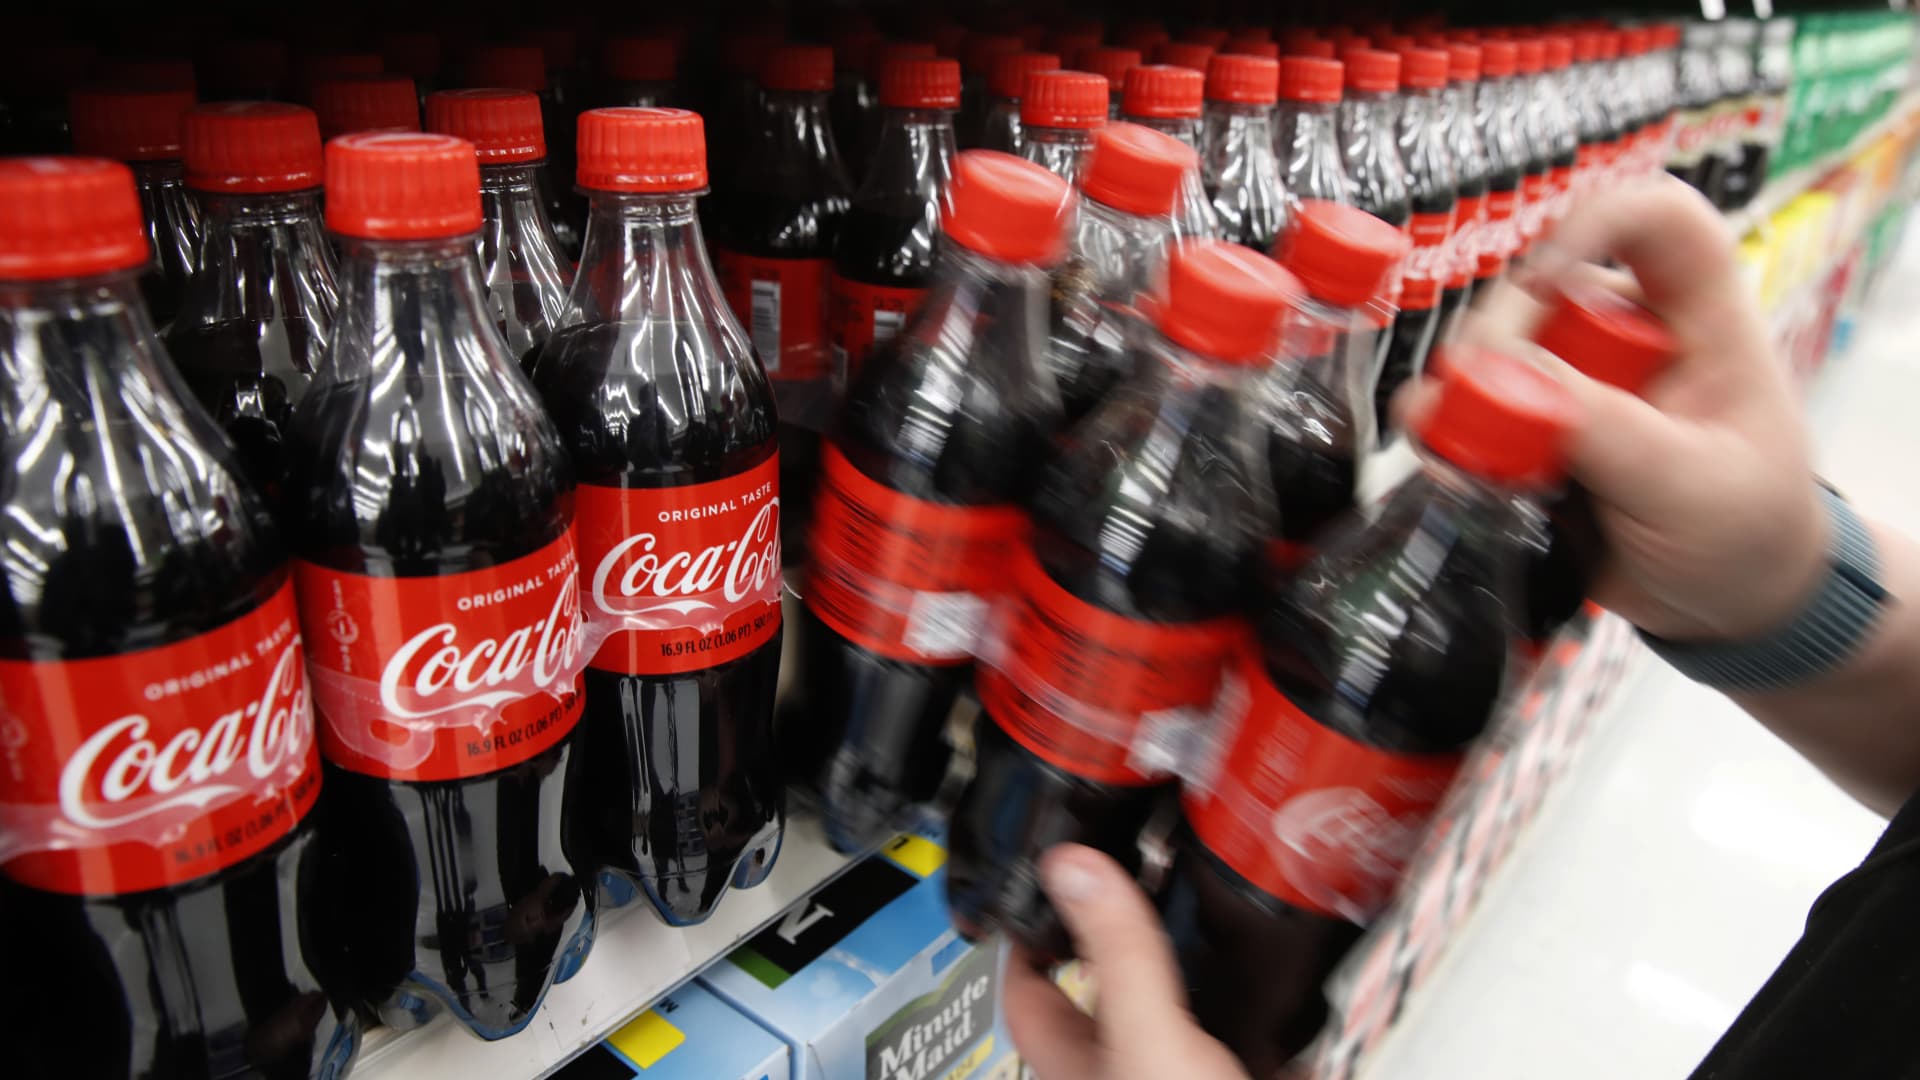 A worker restocks a display of Coca-Cola Co. soft drinks at a store in Orem, Utah, U.S., on Tuesday, Feb. 9, 2021.